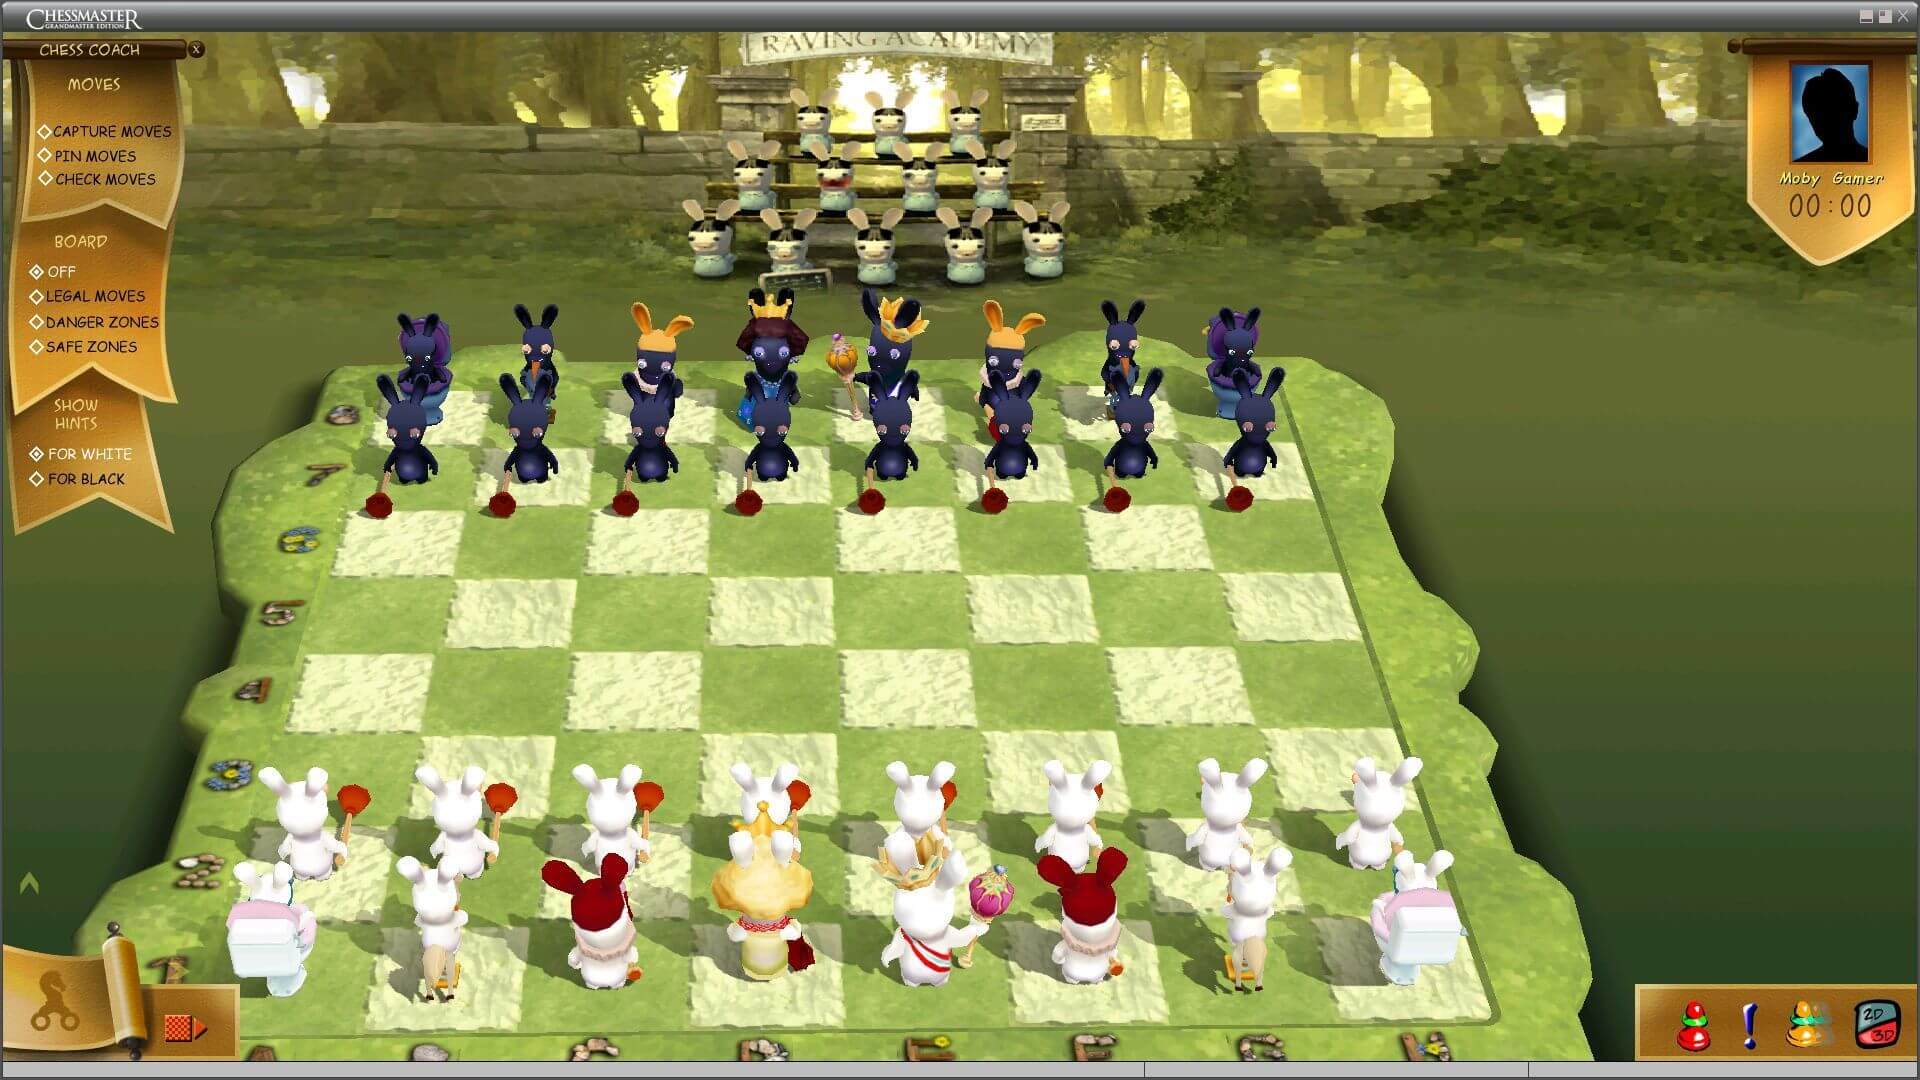 Chessmaster 10th Edition - Download